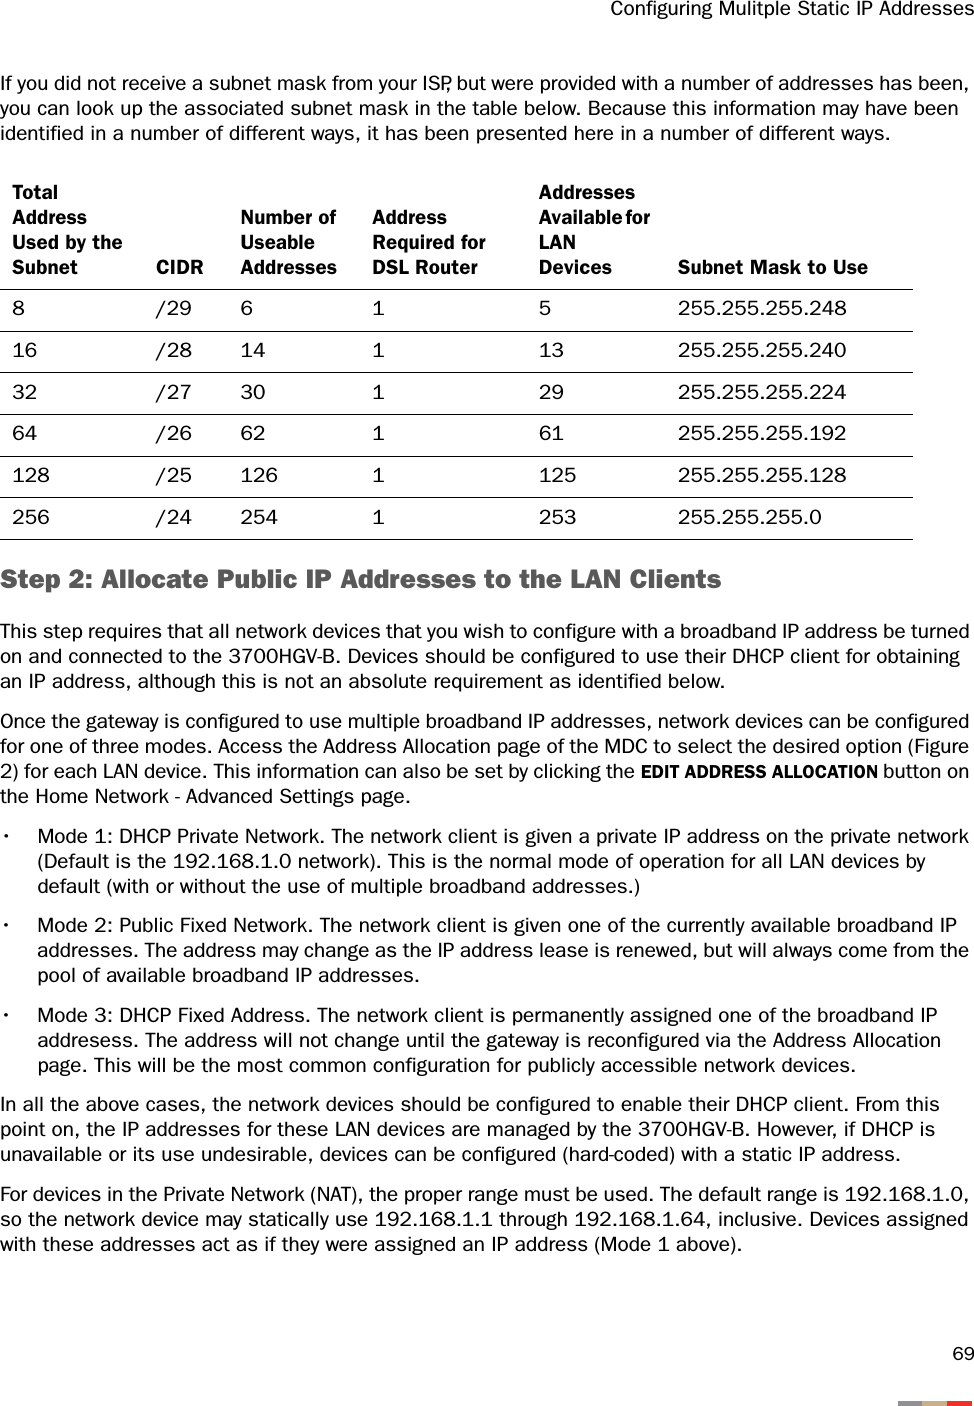 Configuring Mulitple Static IP Addresses69If you did not receive a subnet mask from your ISP, but were provided with a number of addresses has been, you can look up the associated subnet mask in the table below. Because this information may have been identified in a number of different ways, it has been presented here in a number of different ways.Step 2: Allocate Public IP Addresses to the LAN ClientsThis step requires that all network devices that you wish to configure with a broadband IP address be turned on and connected to the 3700HGV-B. Devices should be configured to use their DHCP client for obtaining an IP address, although this is not an absolute requirement as identified below.Once the gateway is configured to use multiple broadband IP addresses, network devices can be configured for one of three modes. Access the Address Allocation page of the MDC to select the desired option (Figure 2) for each LAN device. This information can also be set by clicking the EDIT ADDRESS ALLOCATION button on the Home Network - Advanced Settings page.• Mode 1: DHCP Private Network. The network client is given a private IP address on the private network (Default is the 192.168.1.0 network). This is the normal mode of operation for all LAN devices by default (with or without the use of multiple broadband addresses.)• Mode 2: Public Fixed Network. The network client is given one of the currently available broadband IP addresses. The address may change as the IP address lease is renewed, but will always come from the pool of available broadband IP addresses.• Mode 3: DHCP Fixed Address. The network client is permanently assigned one of the broadband IP addresess. The address will not change until the gateway is reconfigured via the Address Allocation page. This will be the most common configuration for publicly accessible network devices.In all the above cases, the network devices should be configured to enable their DHCP client. From this point on, the IP addresses for these LAN devices are managed by the 3700HGV-B. However, if DHCP is unavailable or its use undesirable, devices can be configured (hard-coded) with a static IP address.For devices in the Private Network (NAT), the proper range must be used. The default range is 192.168.1.0, so the network device may statically use 192.168.1.1 through 192.168.1.64, inclusive. Devices assigned with these addresses act as if they were assigned an IP address (Mode 1 above).Total Address Used by the Subnet CIDRNumber of Useable AddressesAddress Required for DSL RouterAddresses Available for LAN Devices Subnet Mask to Use8 /29 6 1 5 255.255.255.24816 /28 14 1 13 255.255.255.24032 /27 30 1 29 255.255.255.22464 /26 62 1 61 255.255.255.192128 /25 126 1 125 255.255.255.128256 /24 254 1 253 255.255.255.0